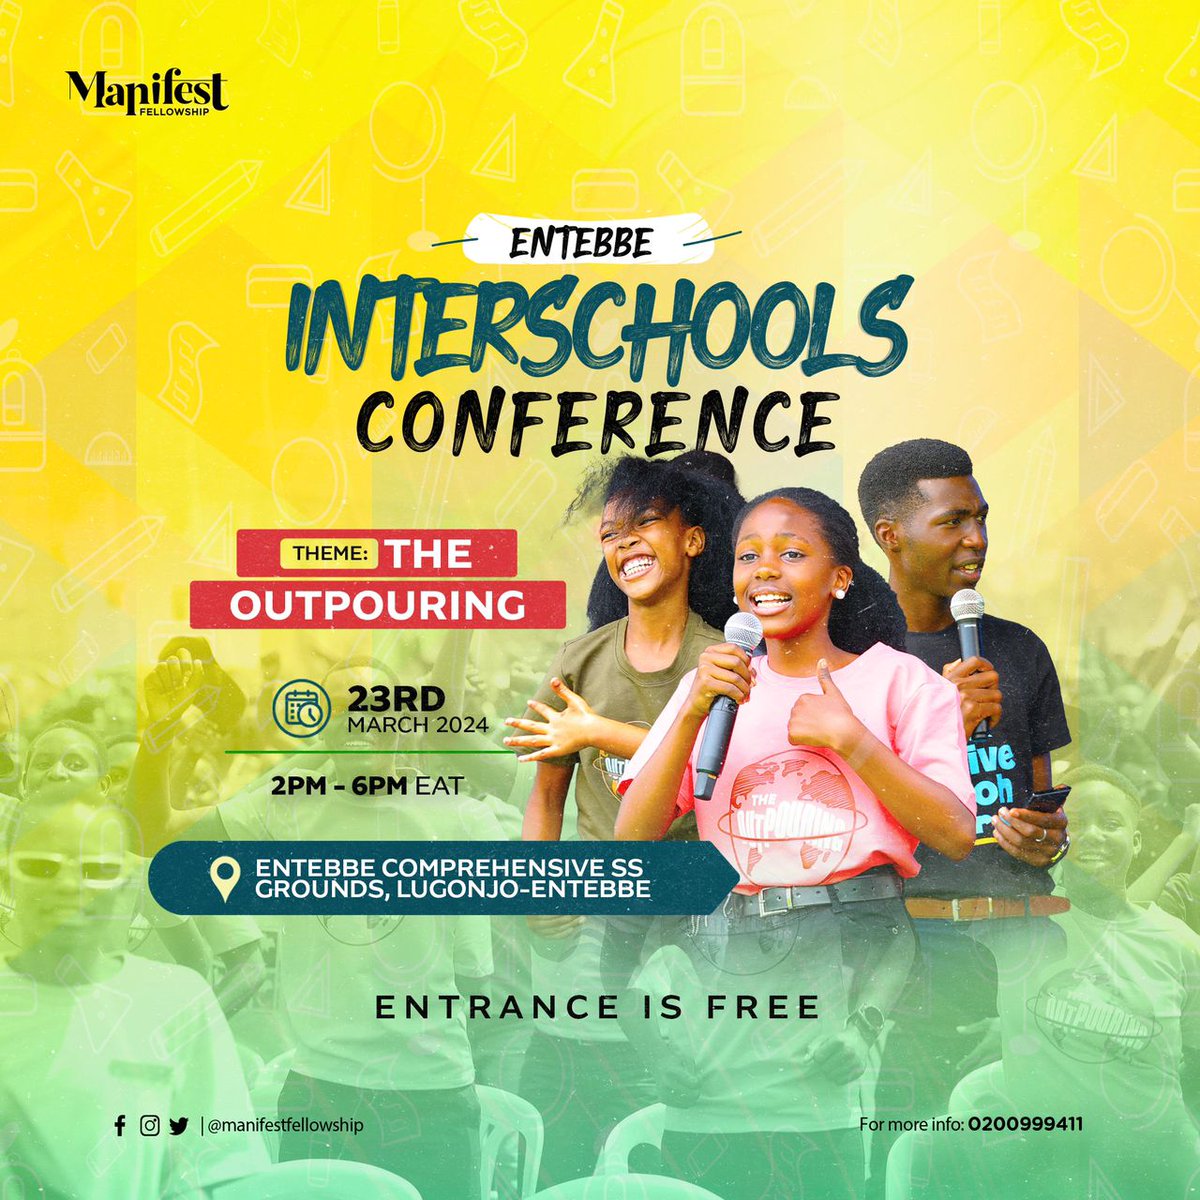 Join us this Saturday 23rd March 2024 at the Entebbe Comprehensive SS Grounds, Lugonjo-Entebbe, for a generational impacting Entebbe InterSchools Conference from 2pm-6pm [EAT].

The Outpouring | FREE ENTRANCE

#InterSchoolsConference

#ManifestFellowship